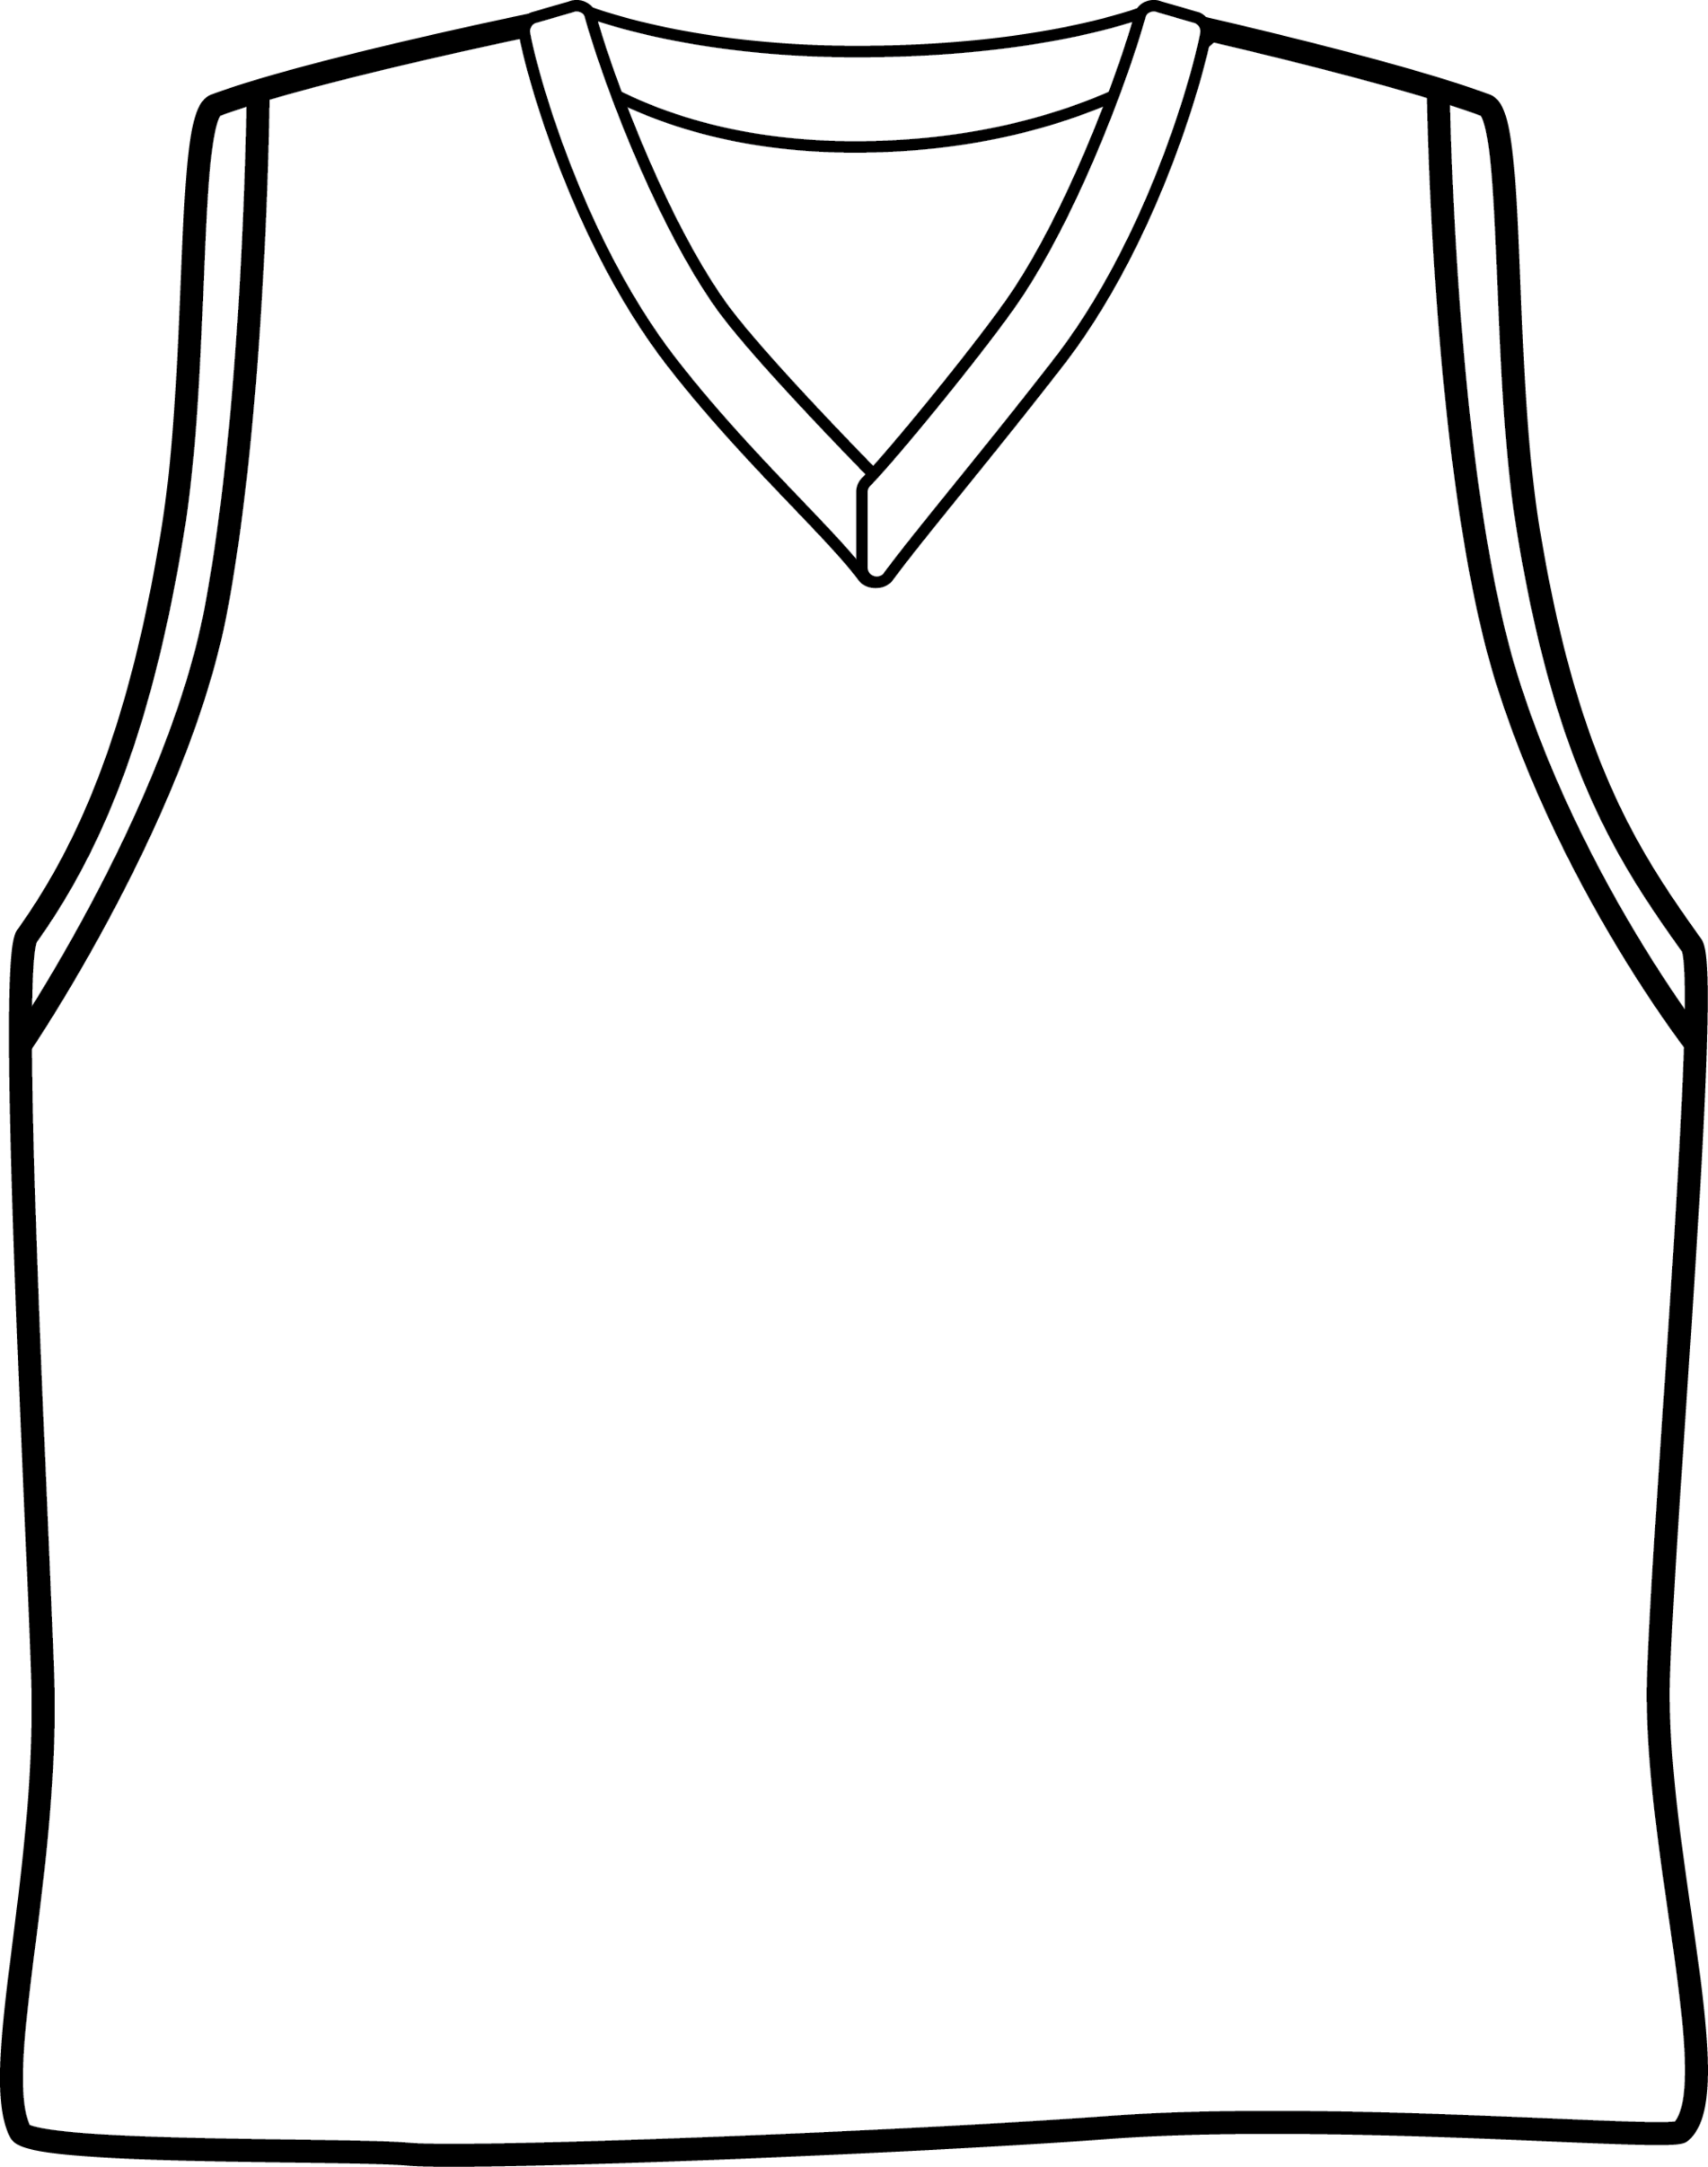 basketball clipart for t shirts - photo #25